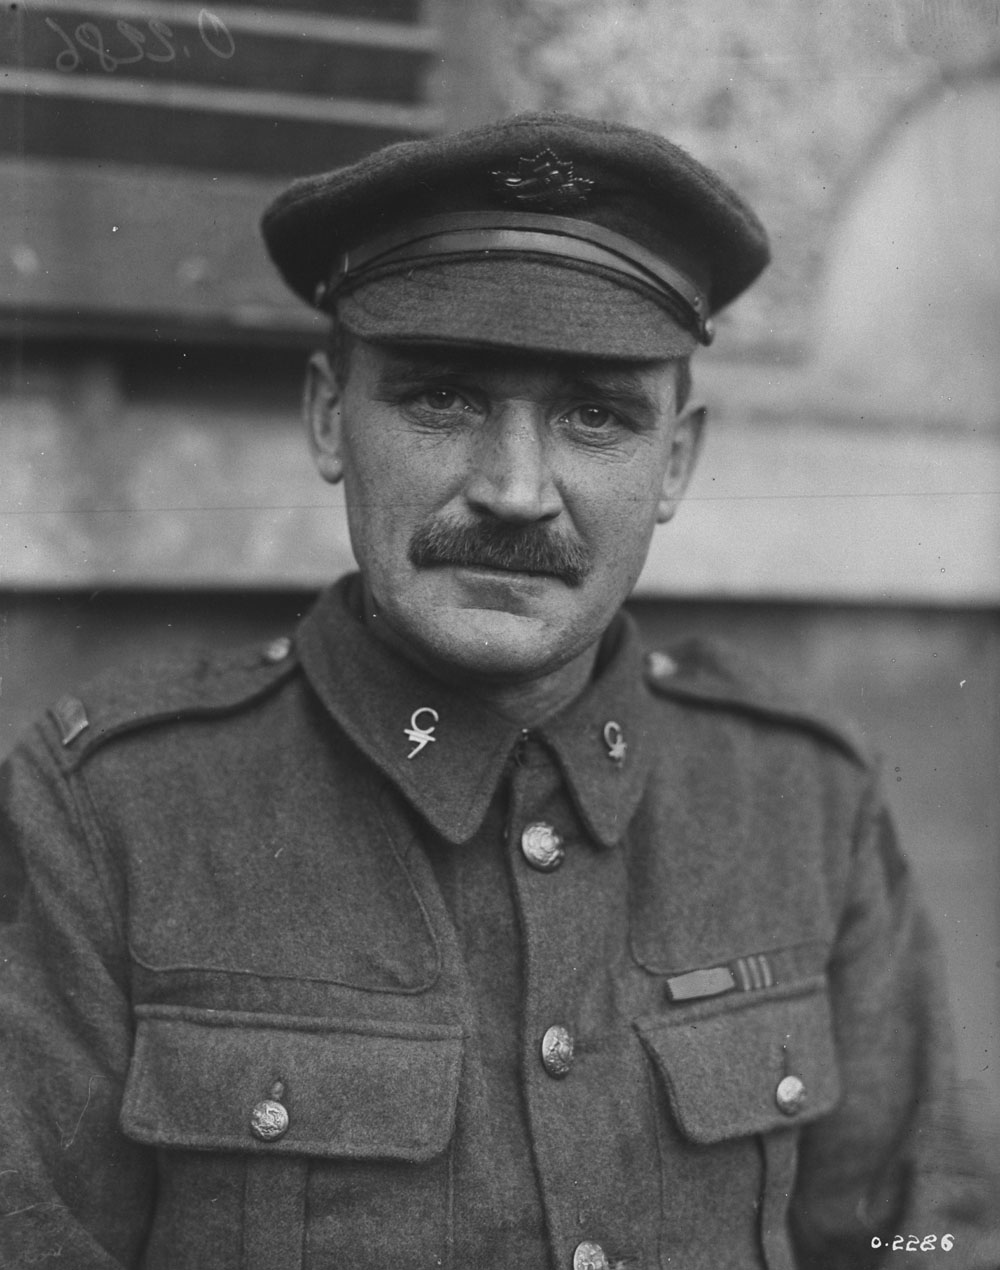 Private Michael James O’Rourke VC, MM in the Great War